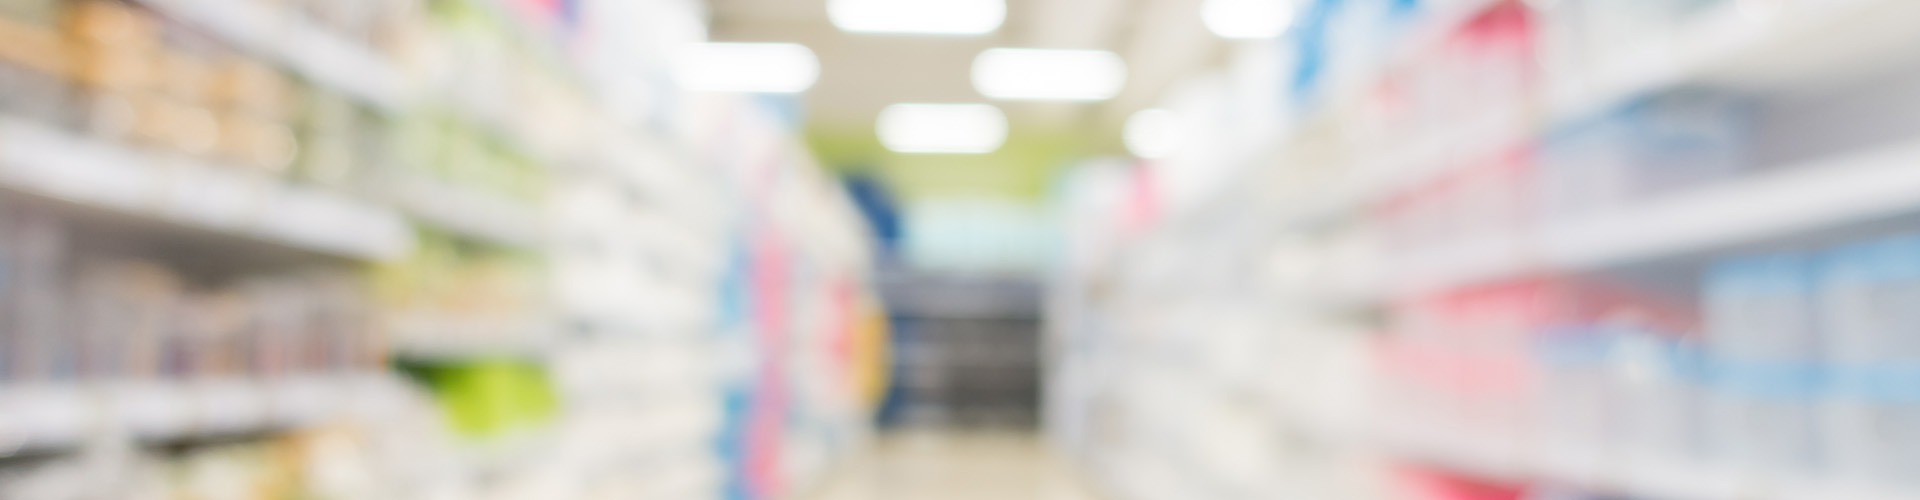 Where Did the Drug Store Shopper Go? Report Banner featuring blurry vision going down drug store aisle